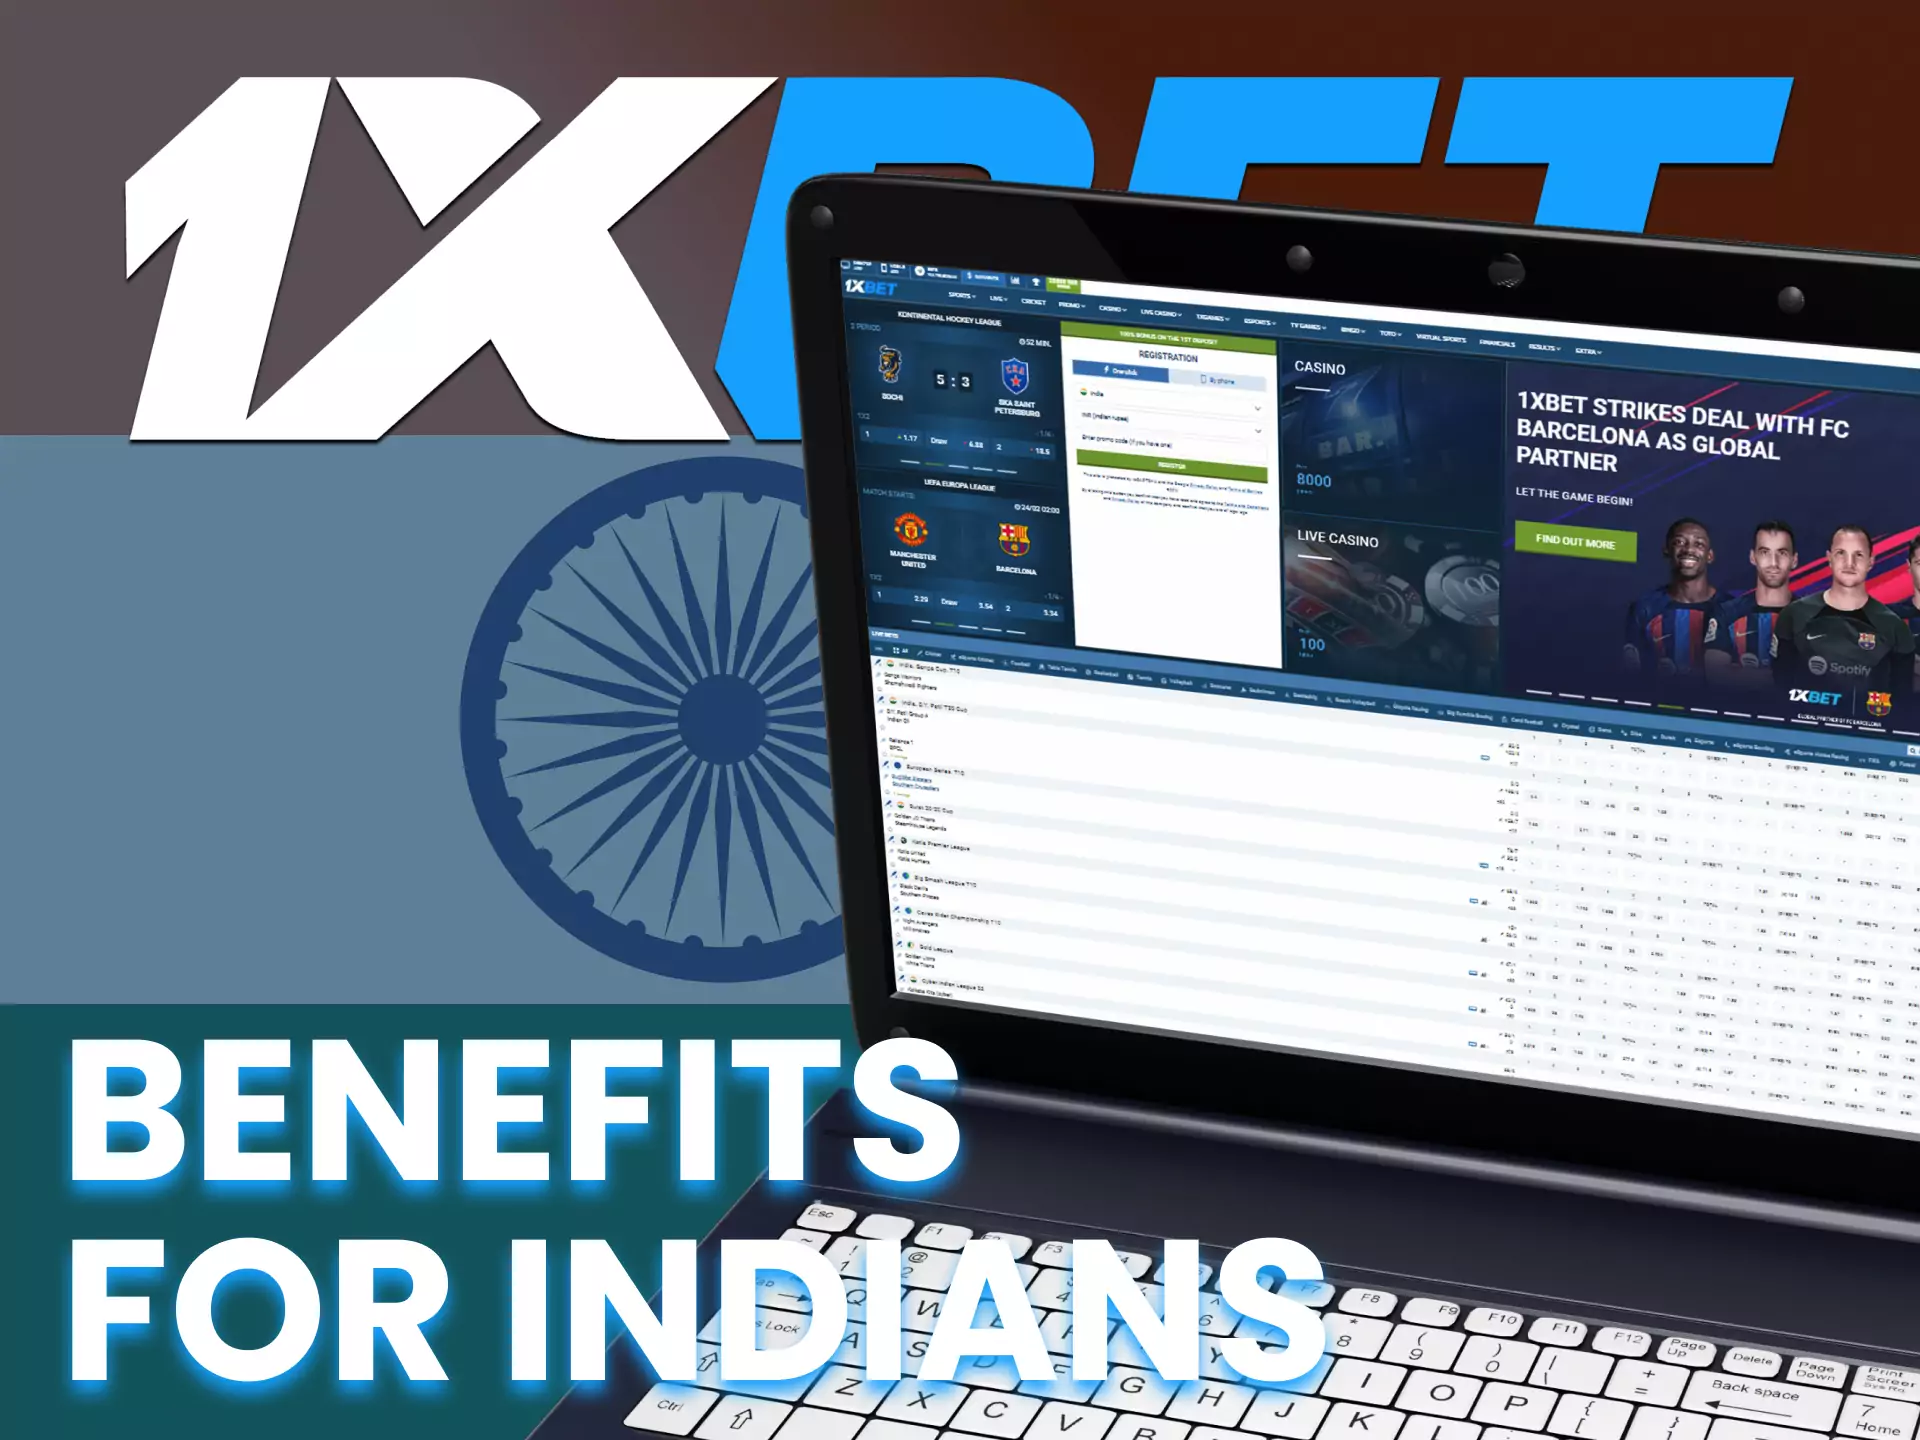 1XBET offers its Indian players many benefits and bonuses.